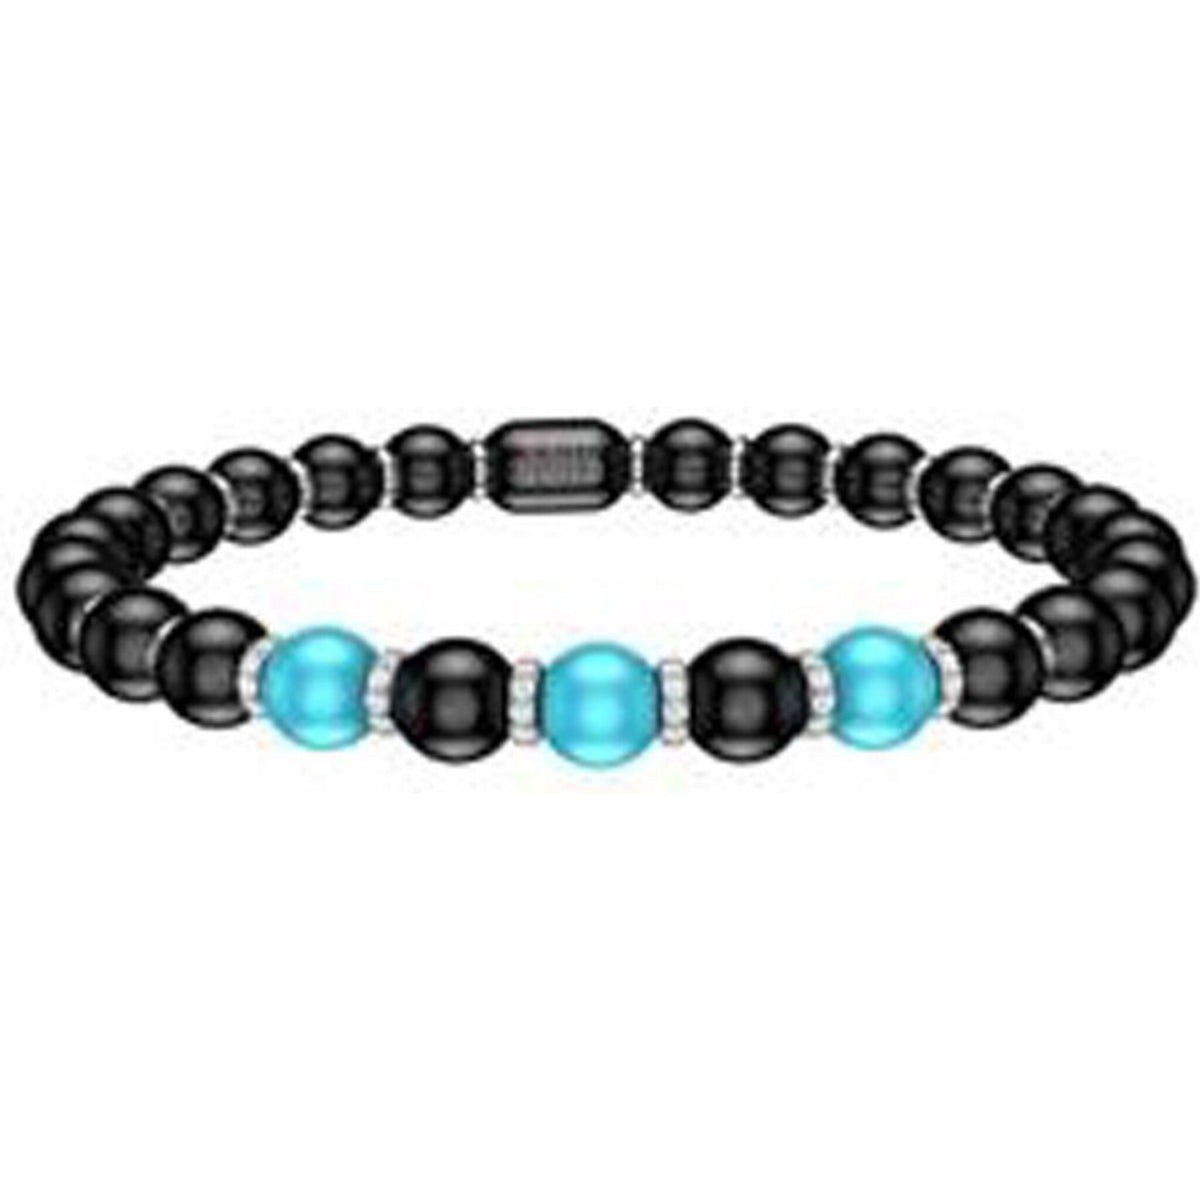 Roberto Demeglio - 6.5mm Black Ceramic Stretch Bracelet With 3 Turquoise, 6 Diamond Beads and Gold Rodells in 18K White Gold